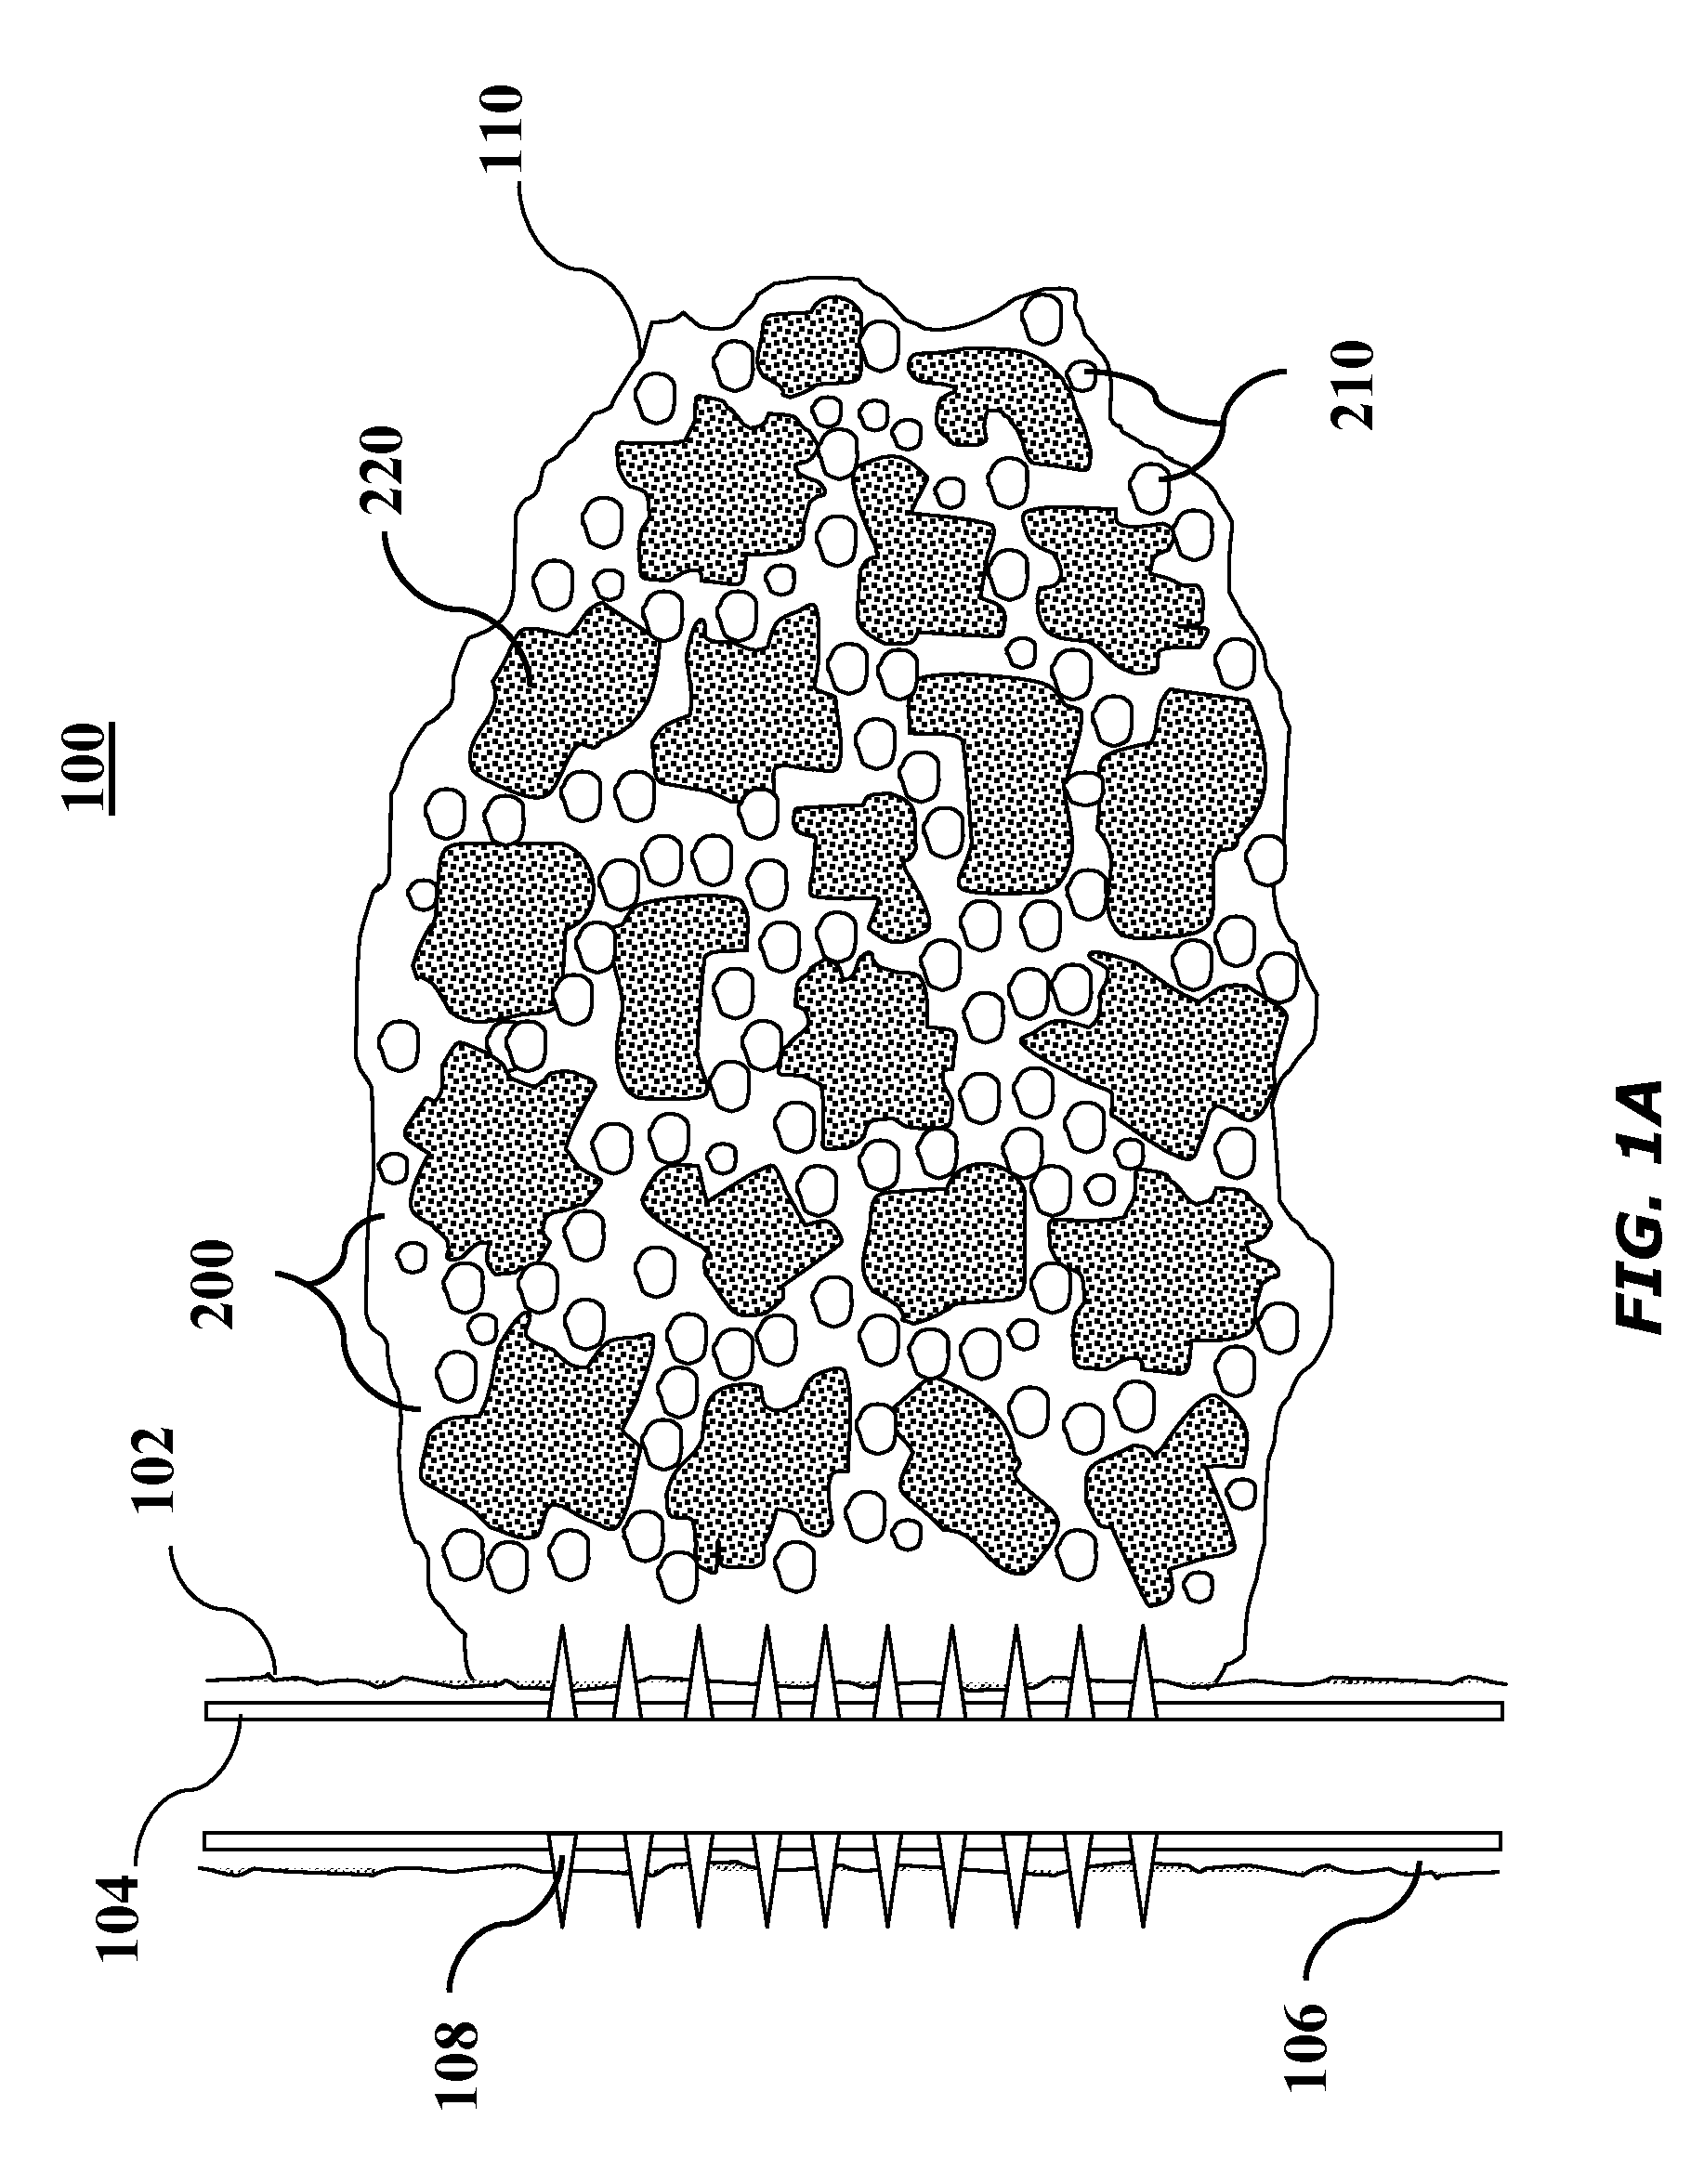 Methods of forming high-porosity fractures in weakly consolidated or unconsolidated formations